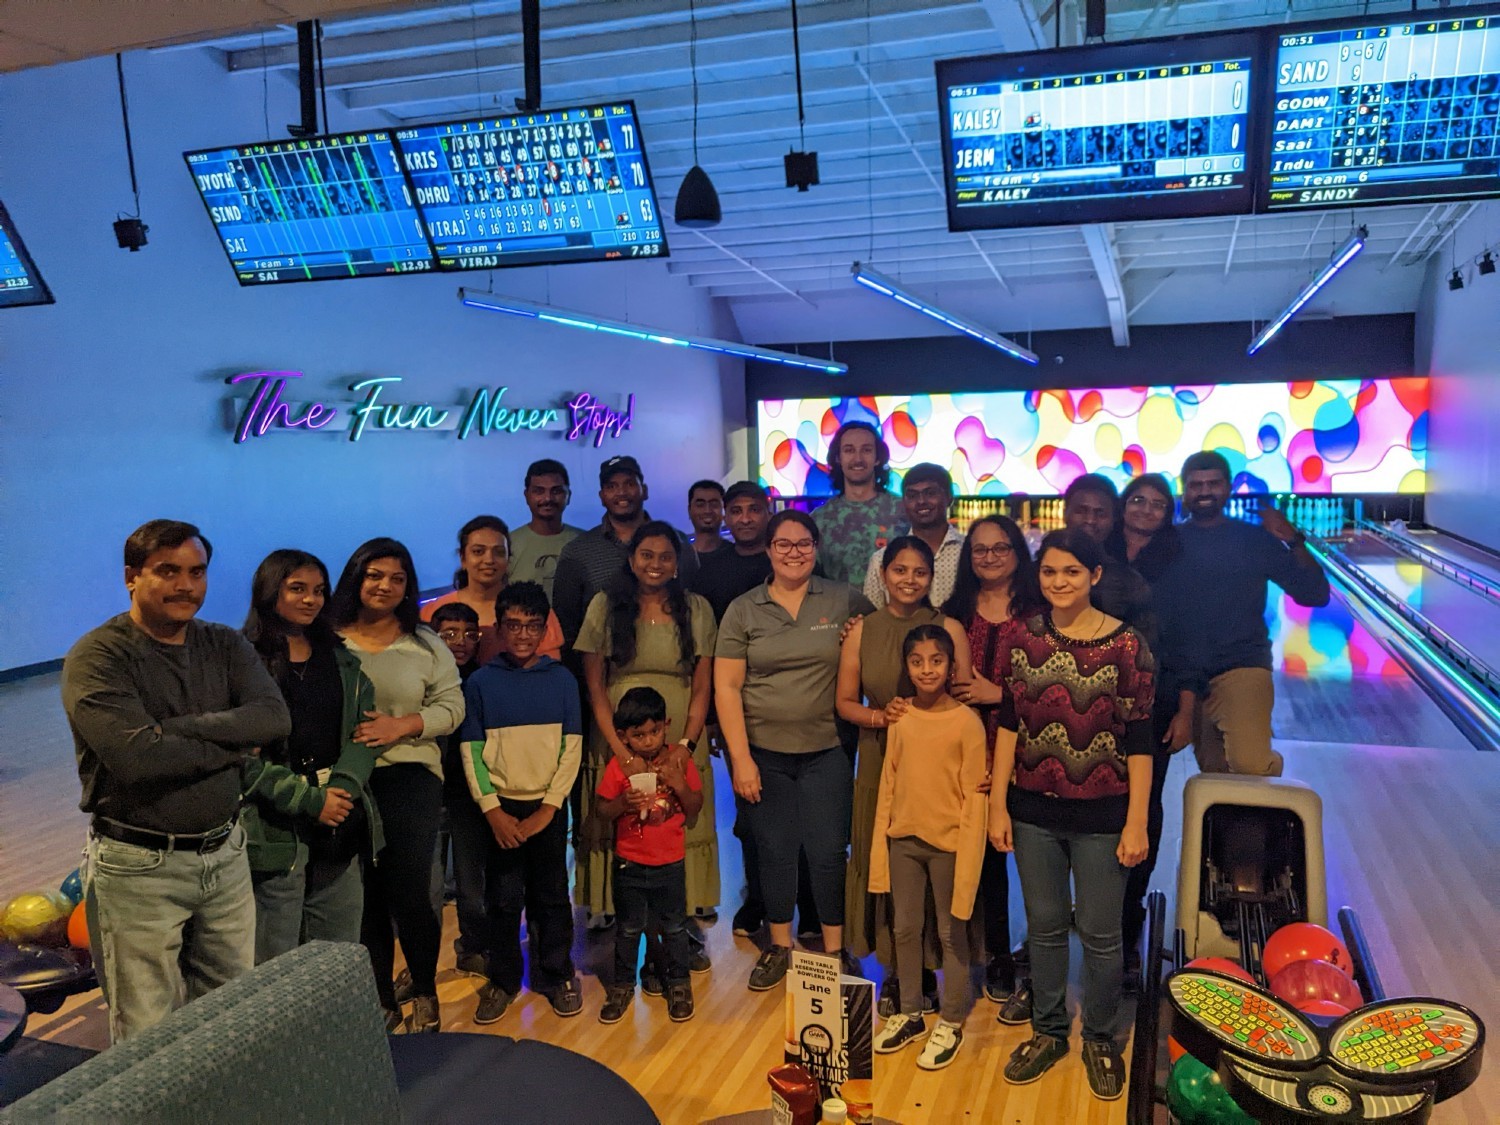 Altimetrians and their familes enjoying a bowling event.